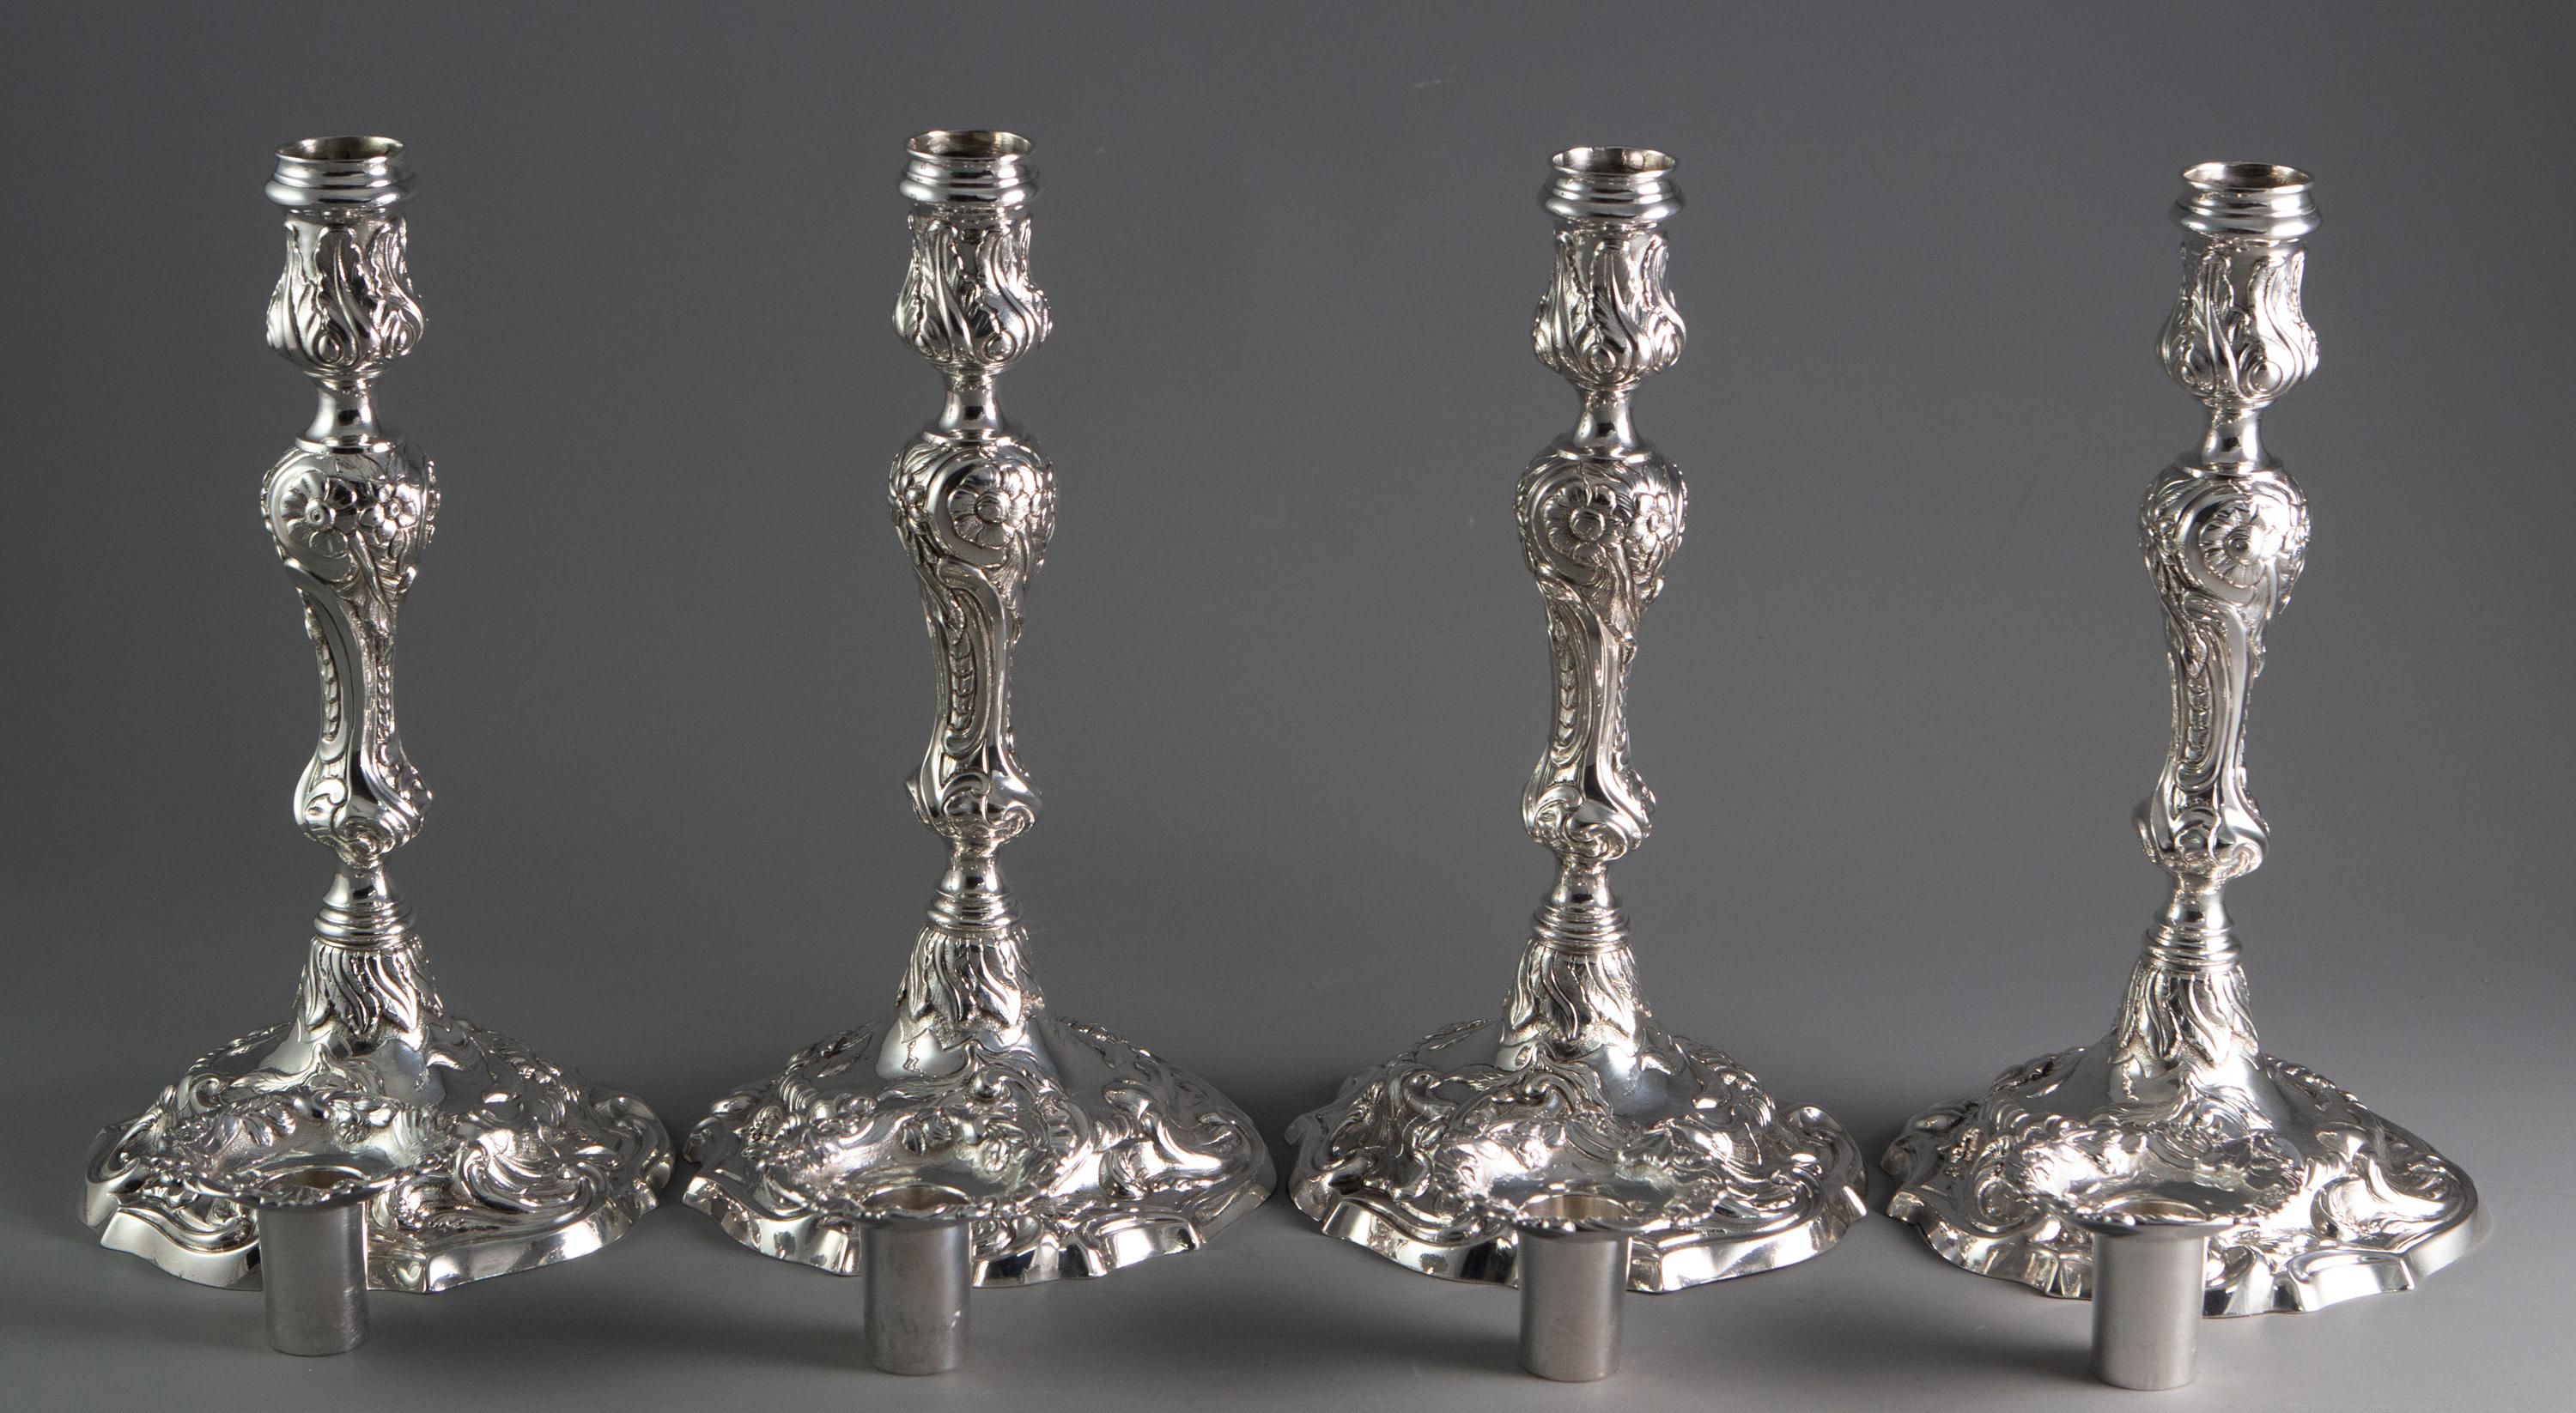 Sterling Silver A Set of 4 George II Cast Silver Candlesticks, London 1753 by John Cafe